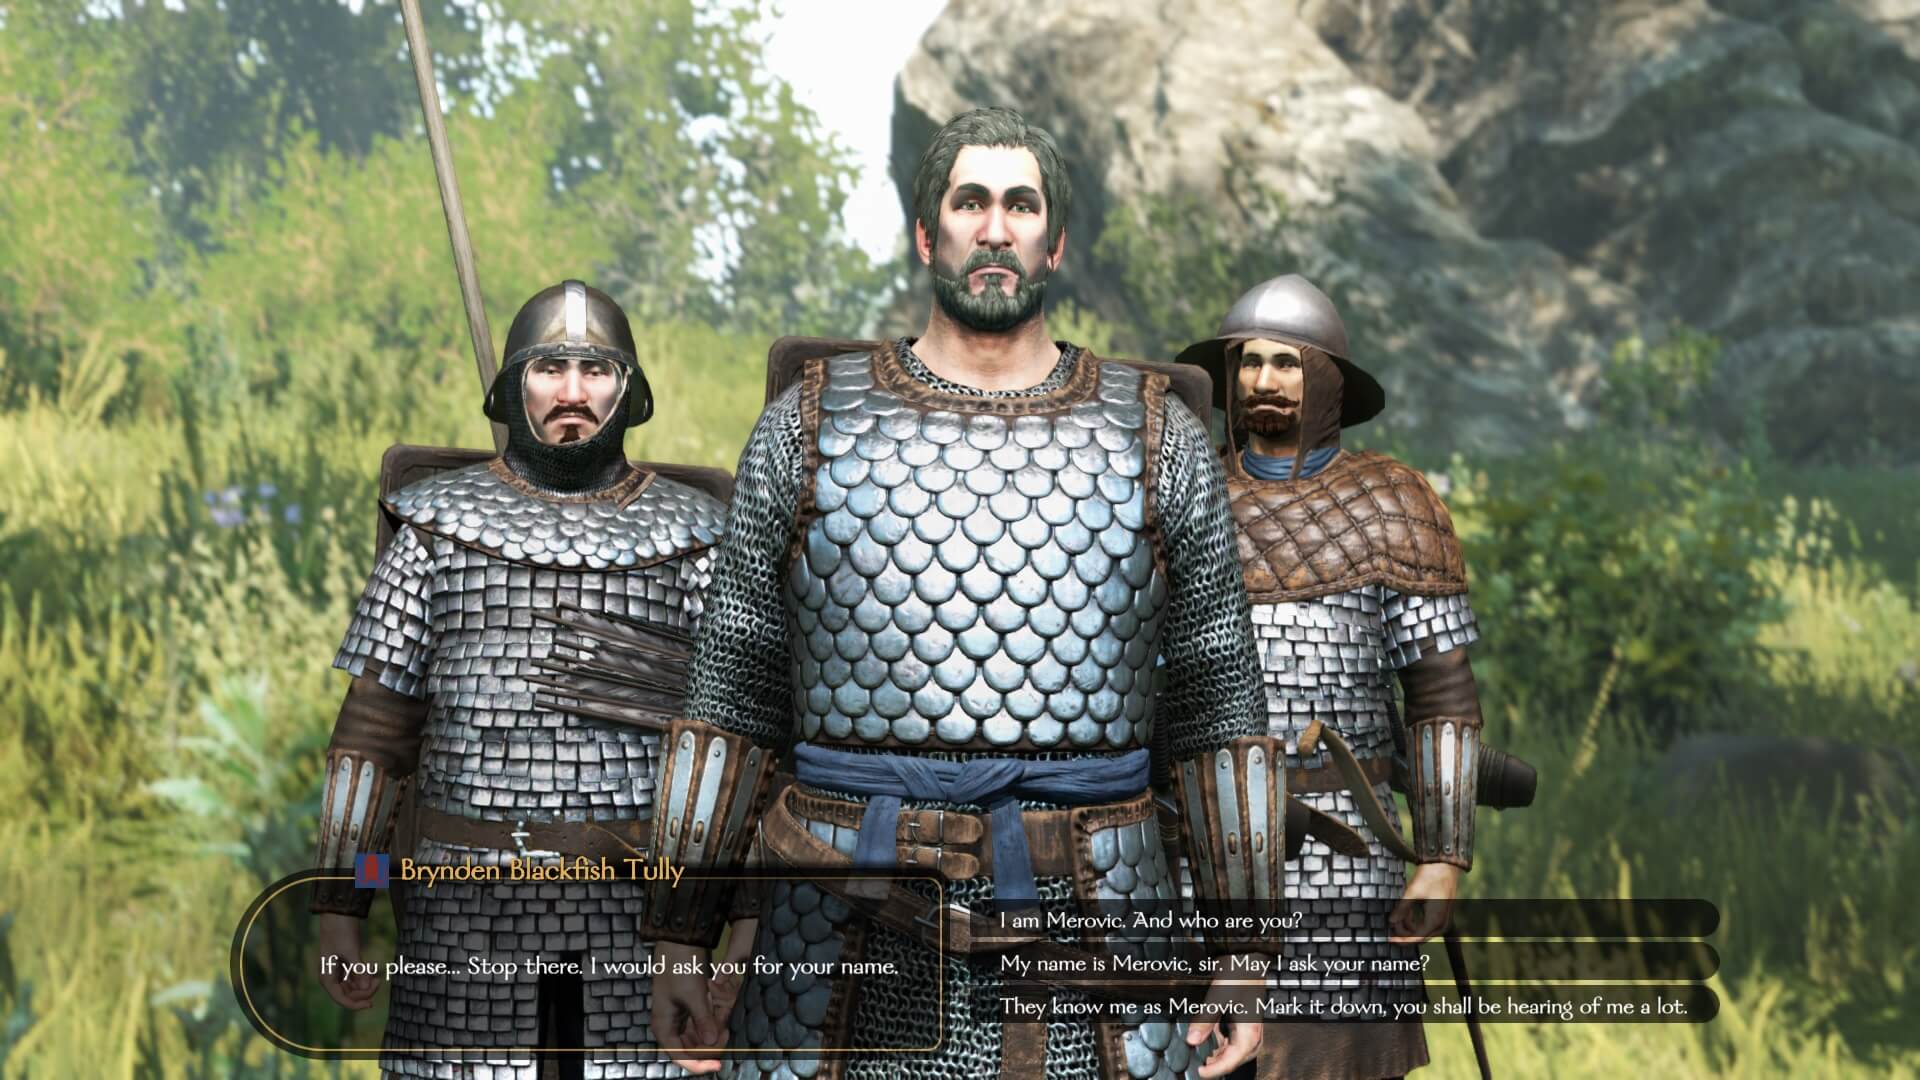 mount and blade realistic mod